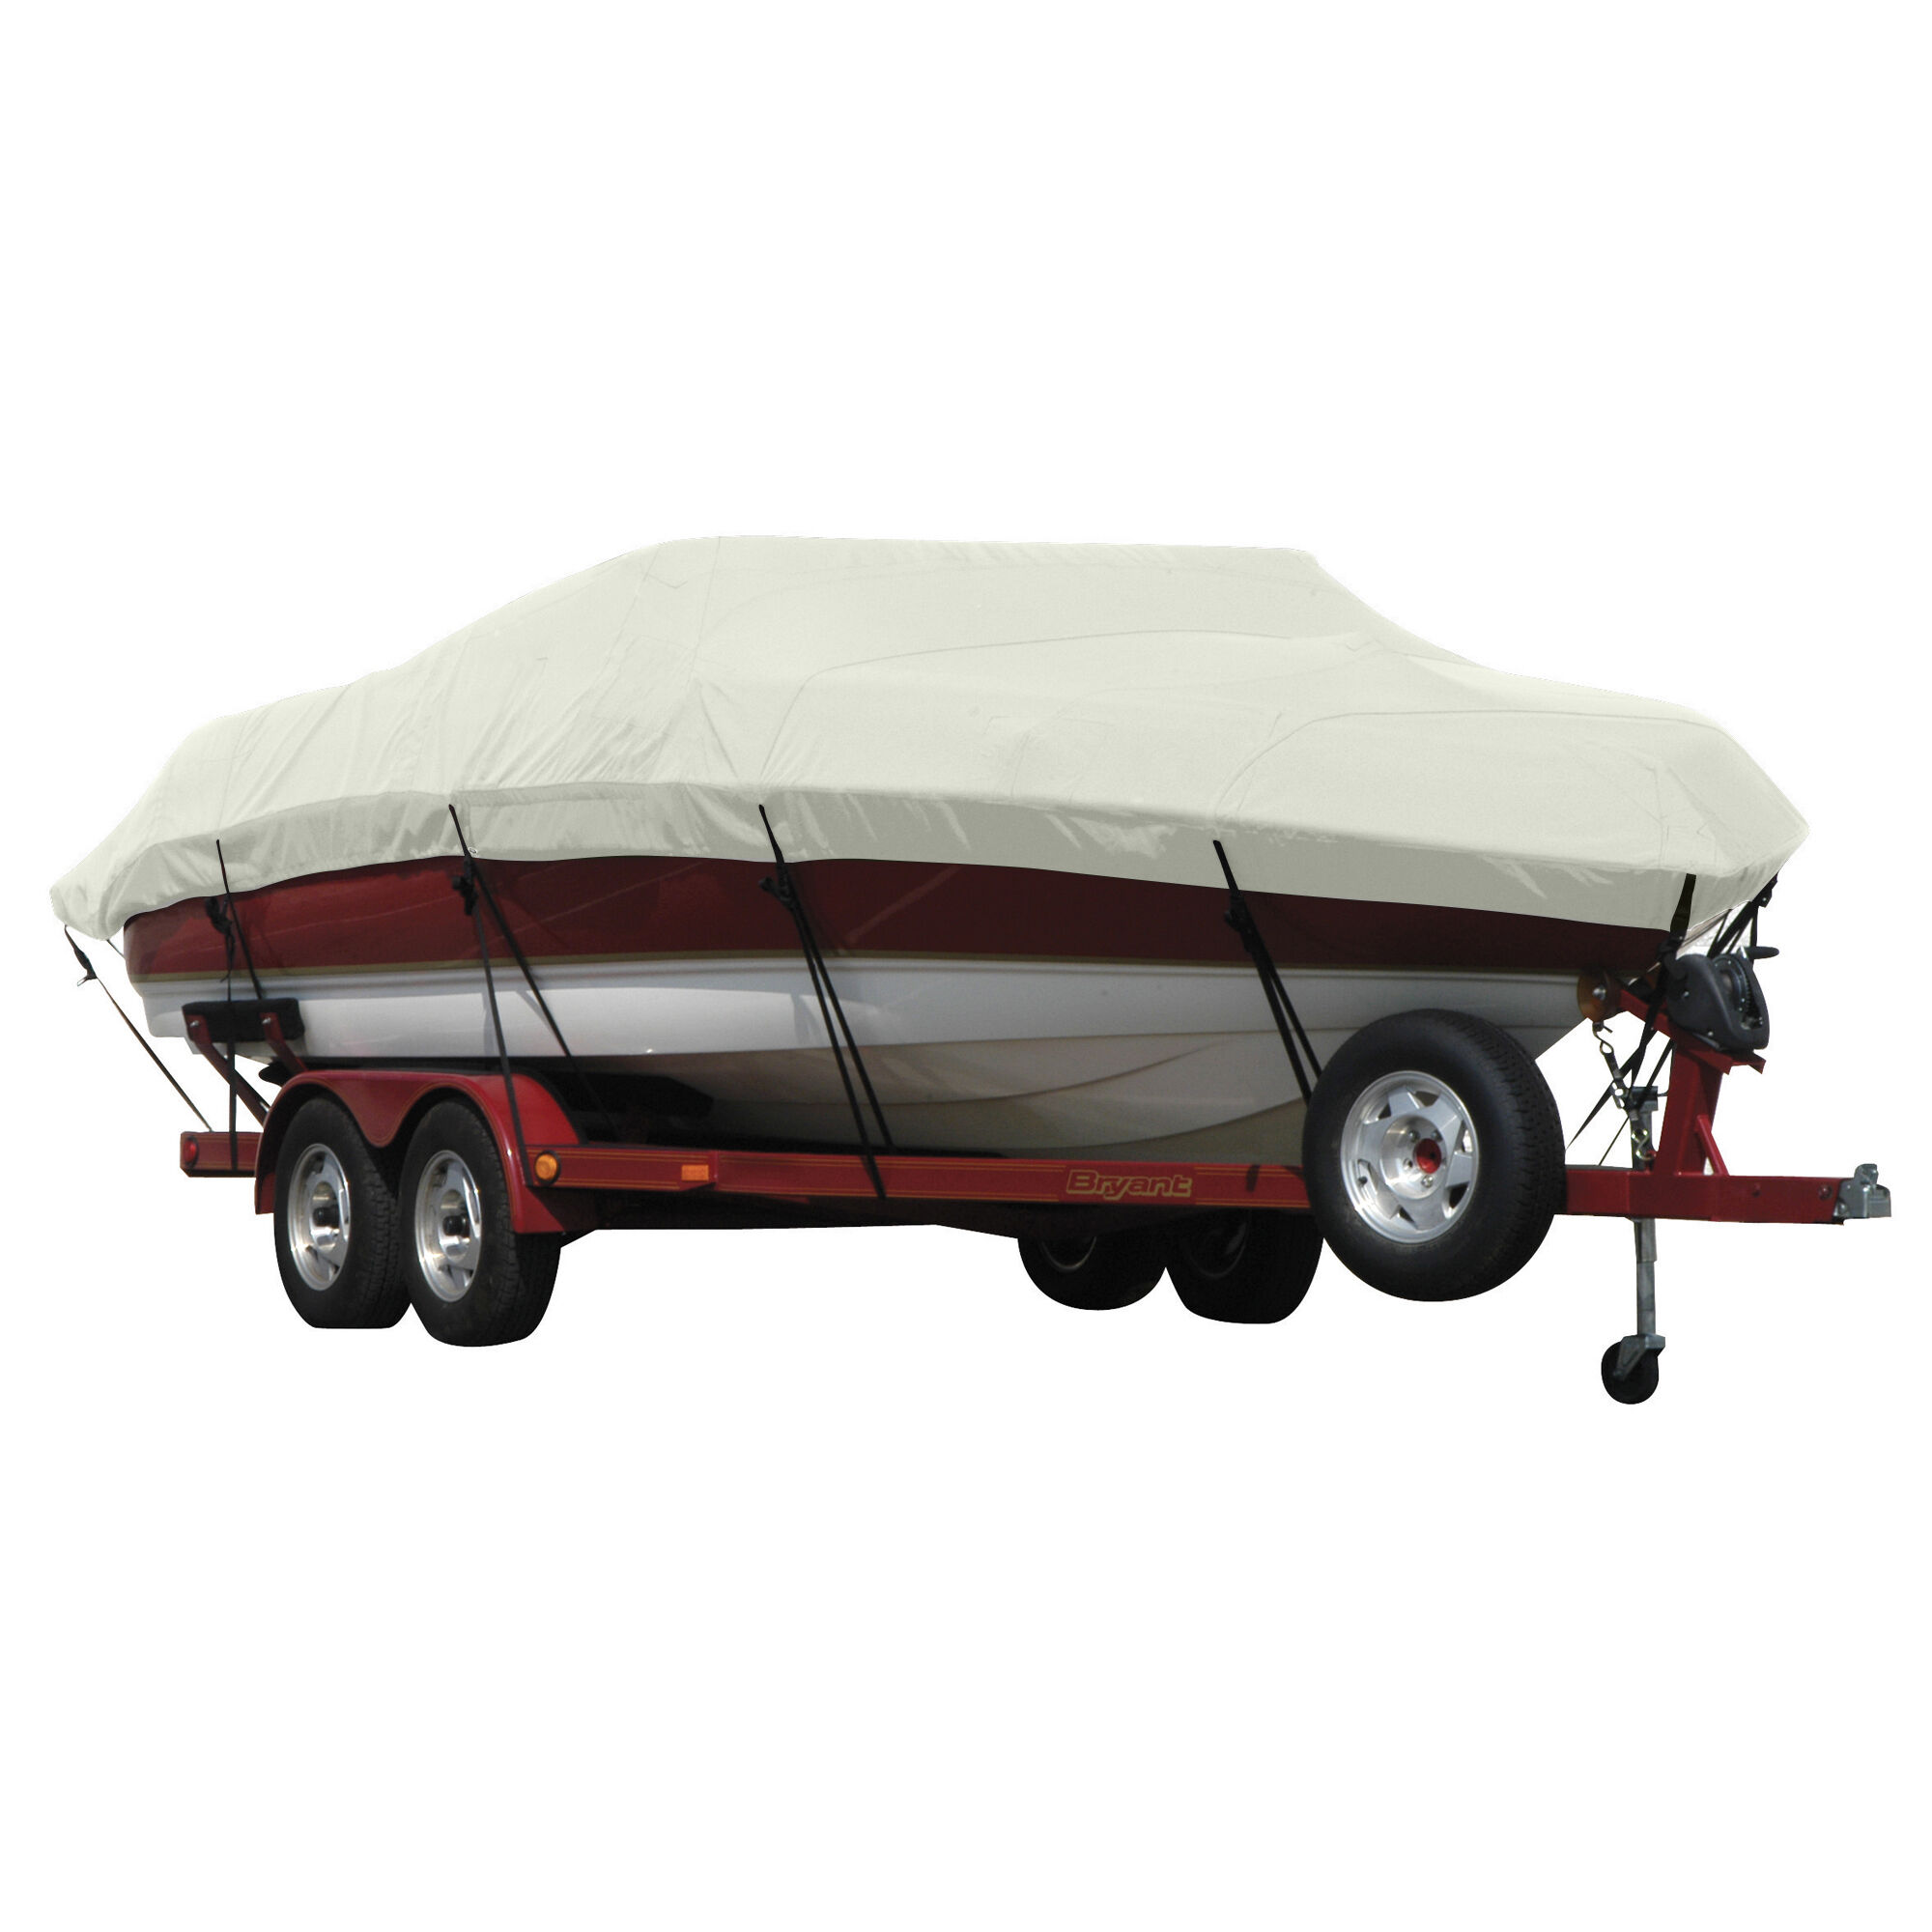 Covermate Exact Fit Sunbrella Boat Cover for Commander Party Deck 2800 Party Deck 2800 I/O. Silver